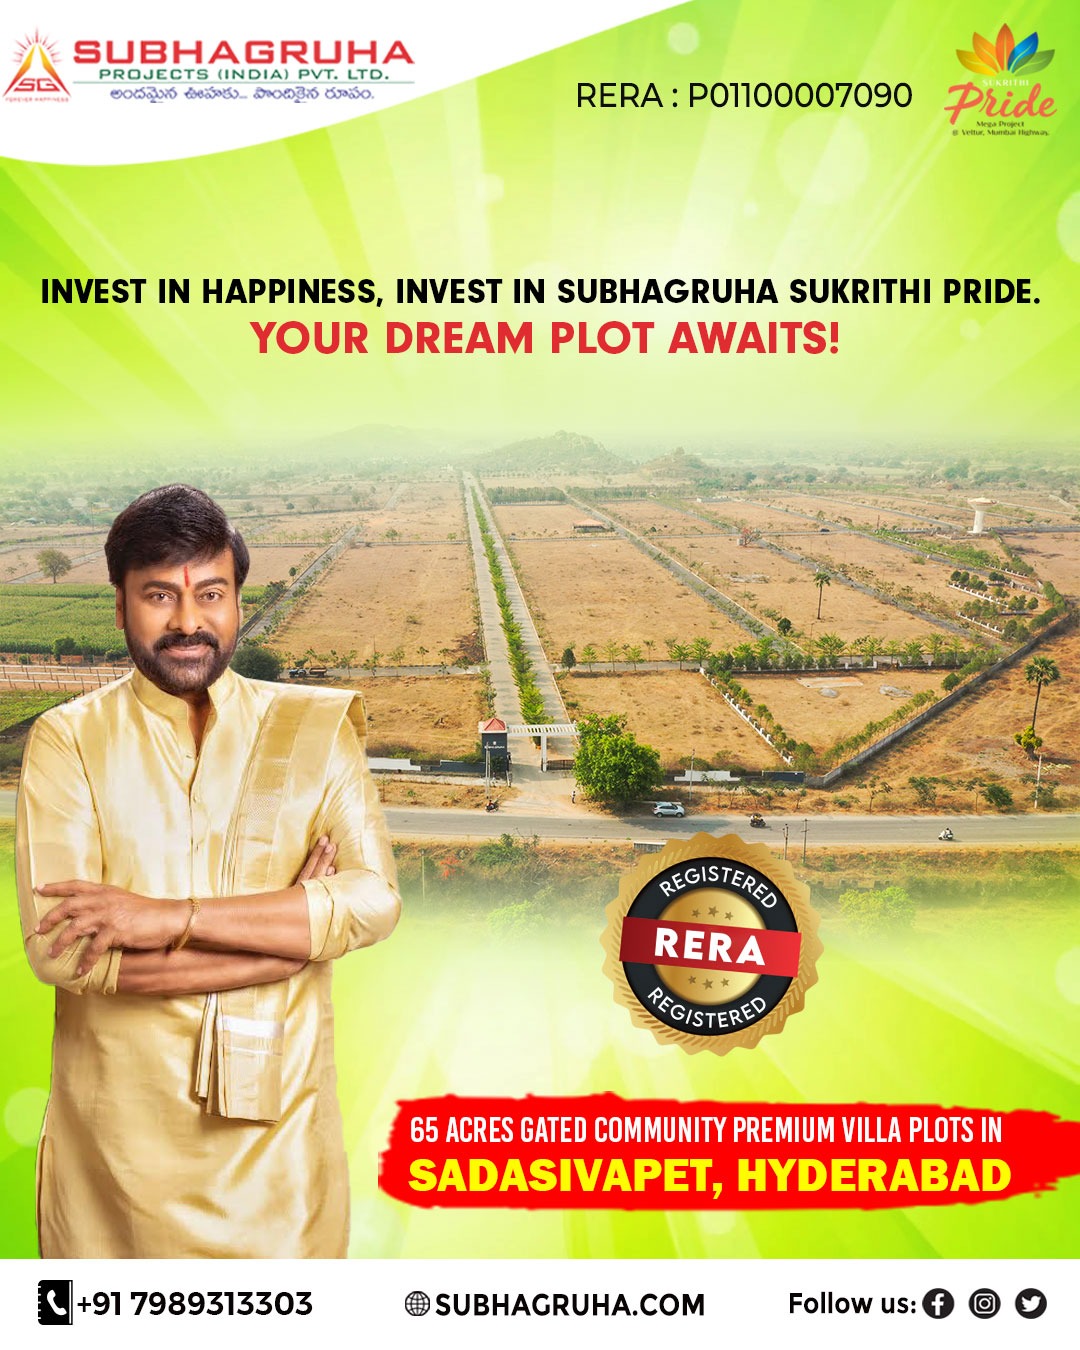 Plots for sale in hyderabadReal EstateLand Plot For SaleAll Indiaother